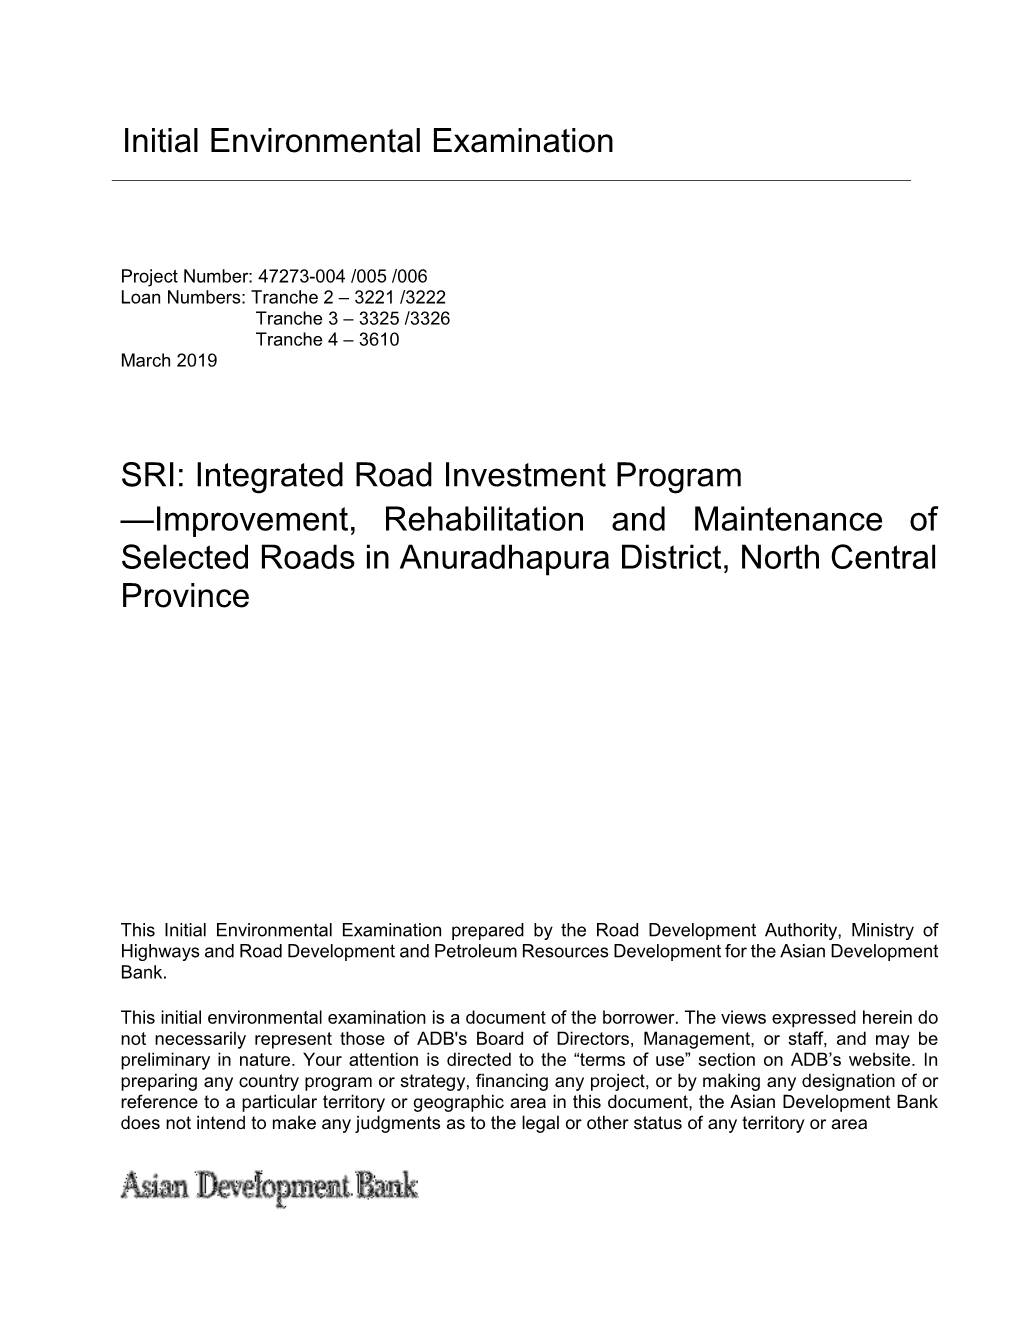 47273-005: Integrated Road Investment Program – Tranche 3 | 4727